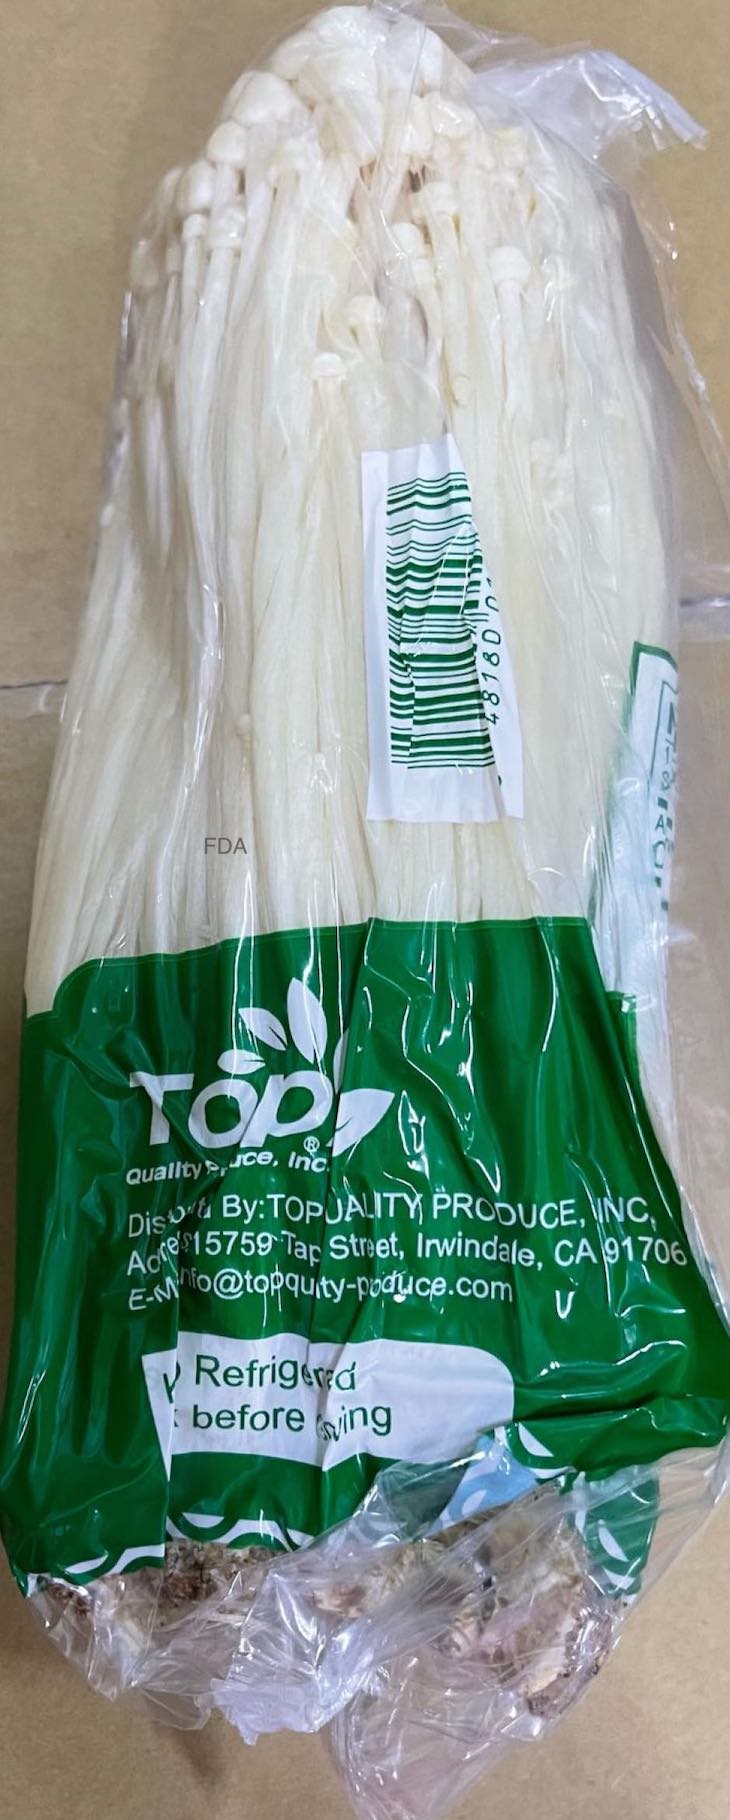 Top Quality Produce Enoki Mushrooms Recalled For Listeria